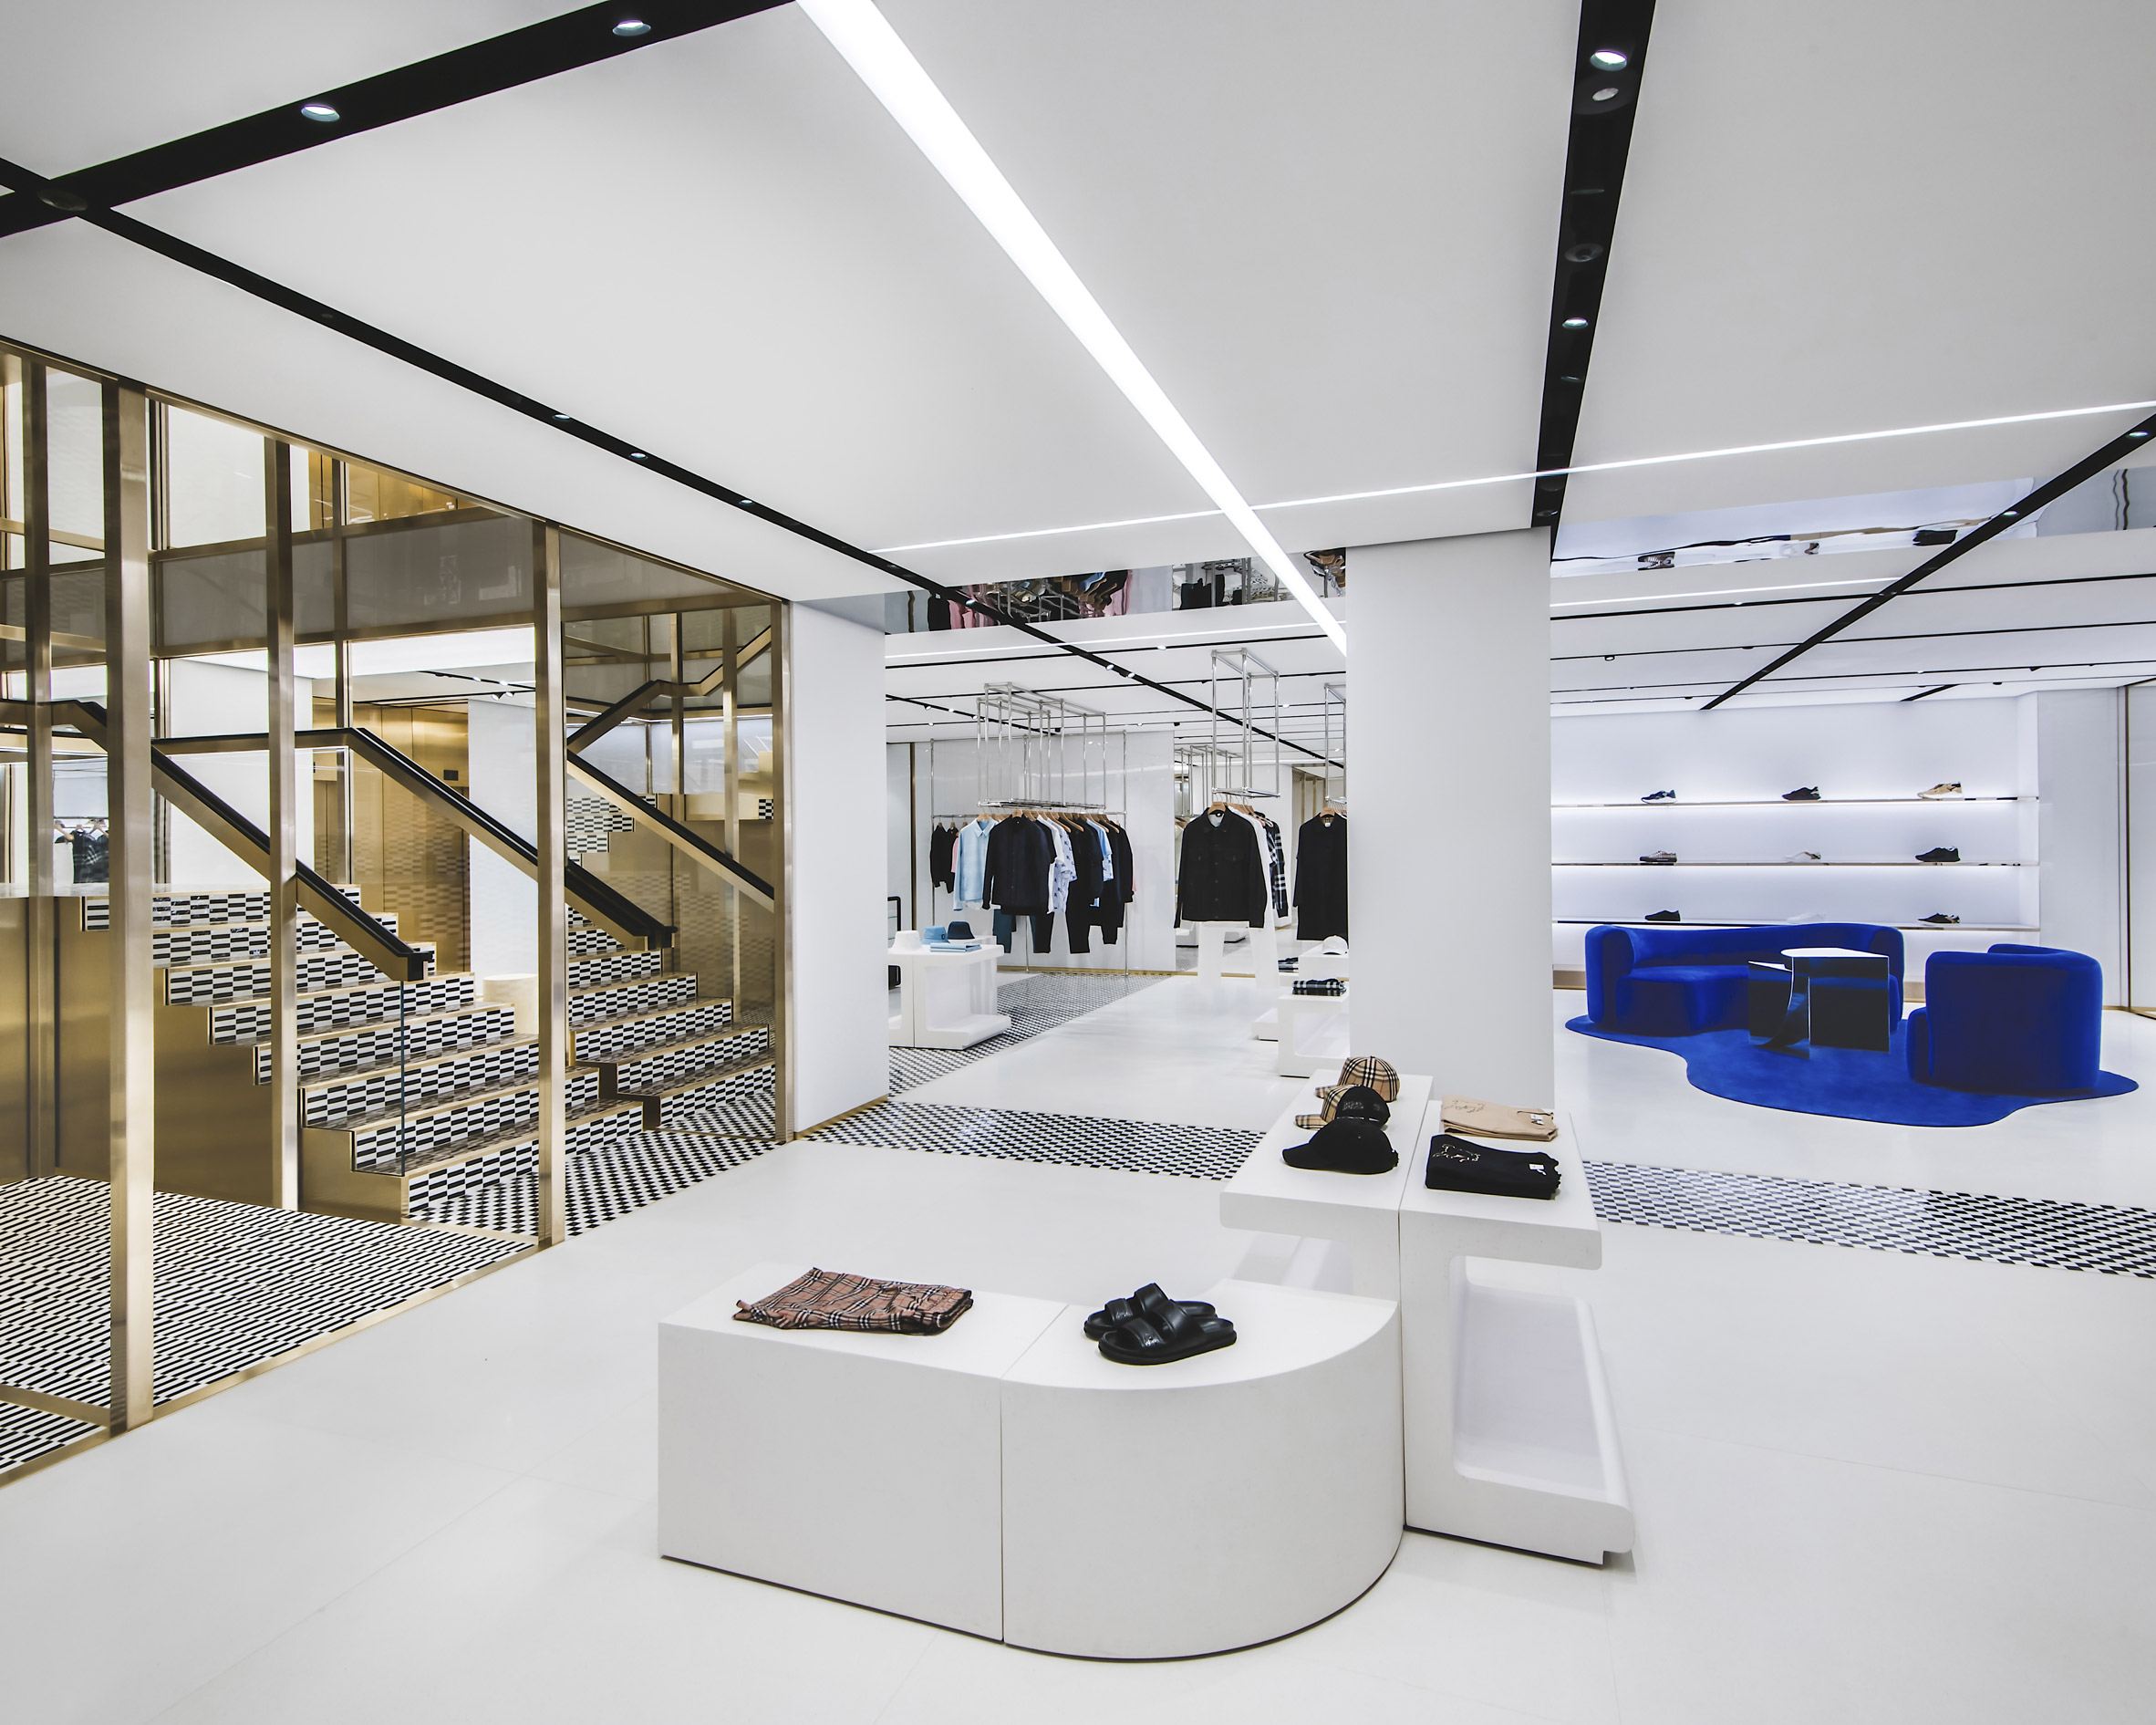 Dior opens bigger store on Sloane Street, adds menswear to offer